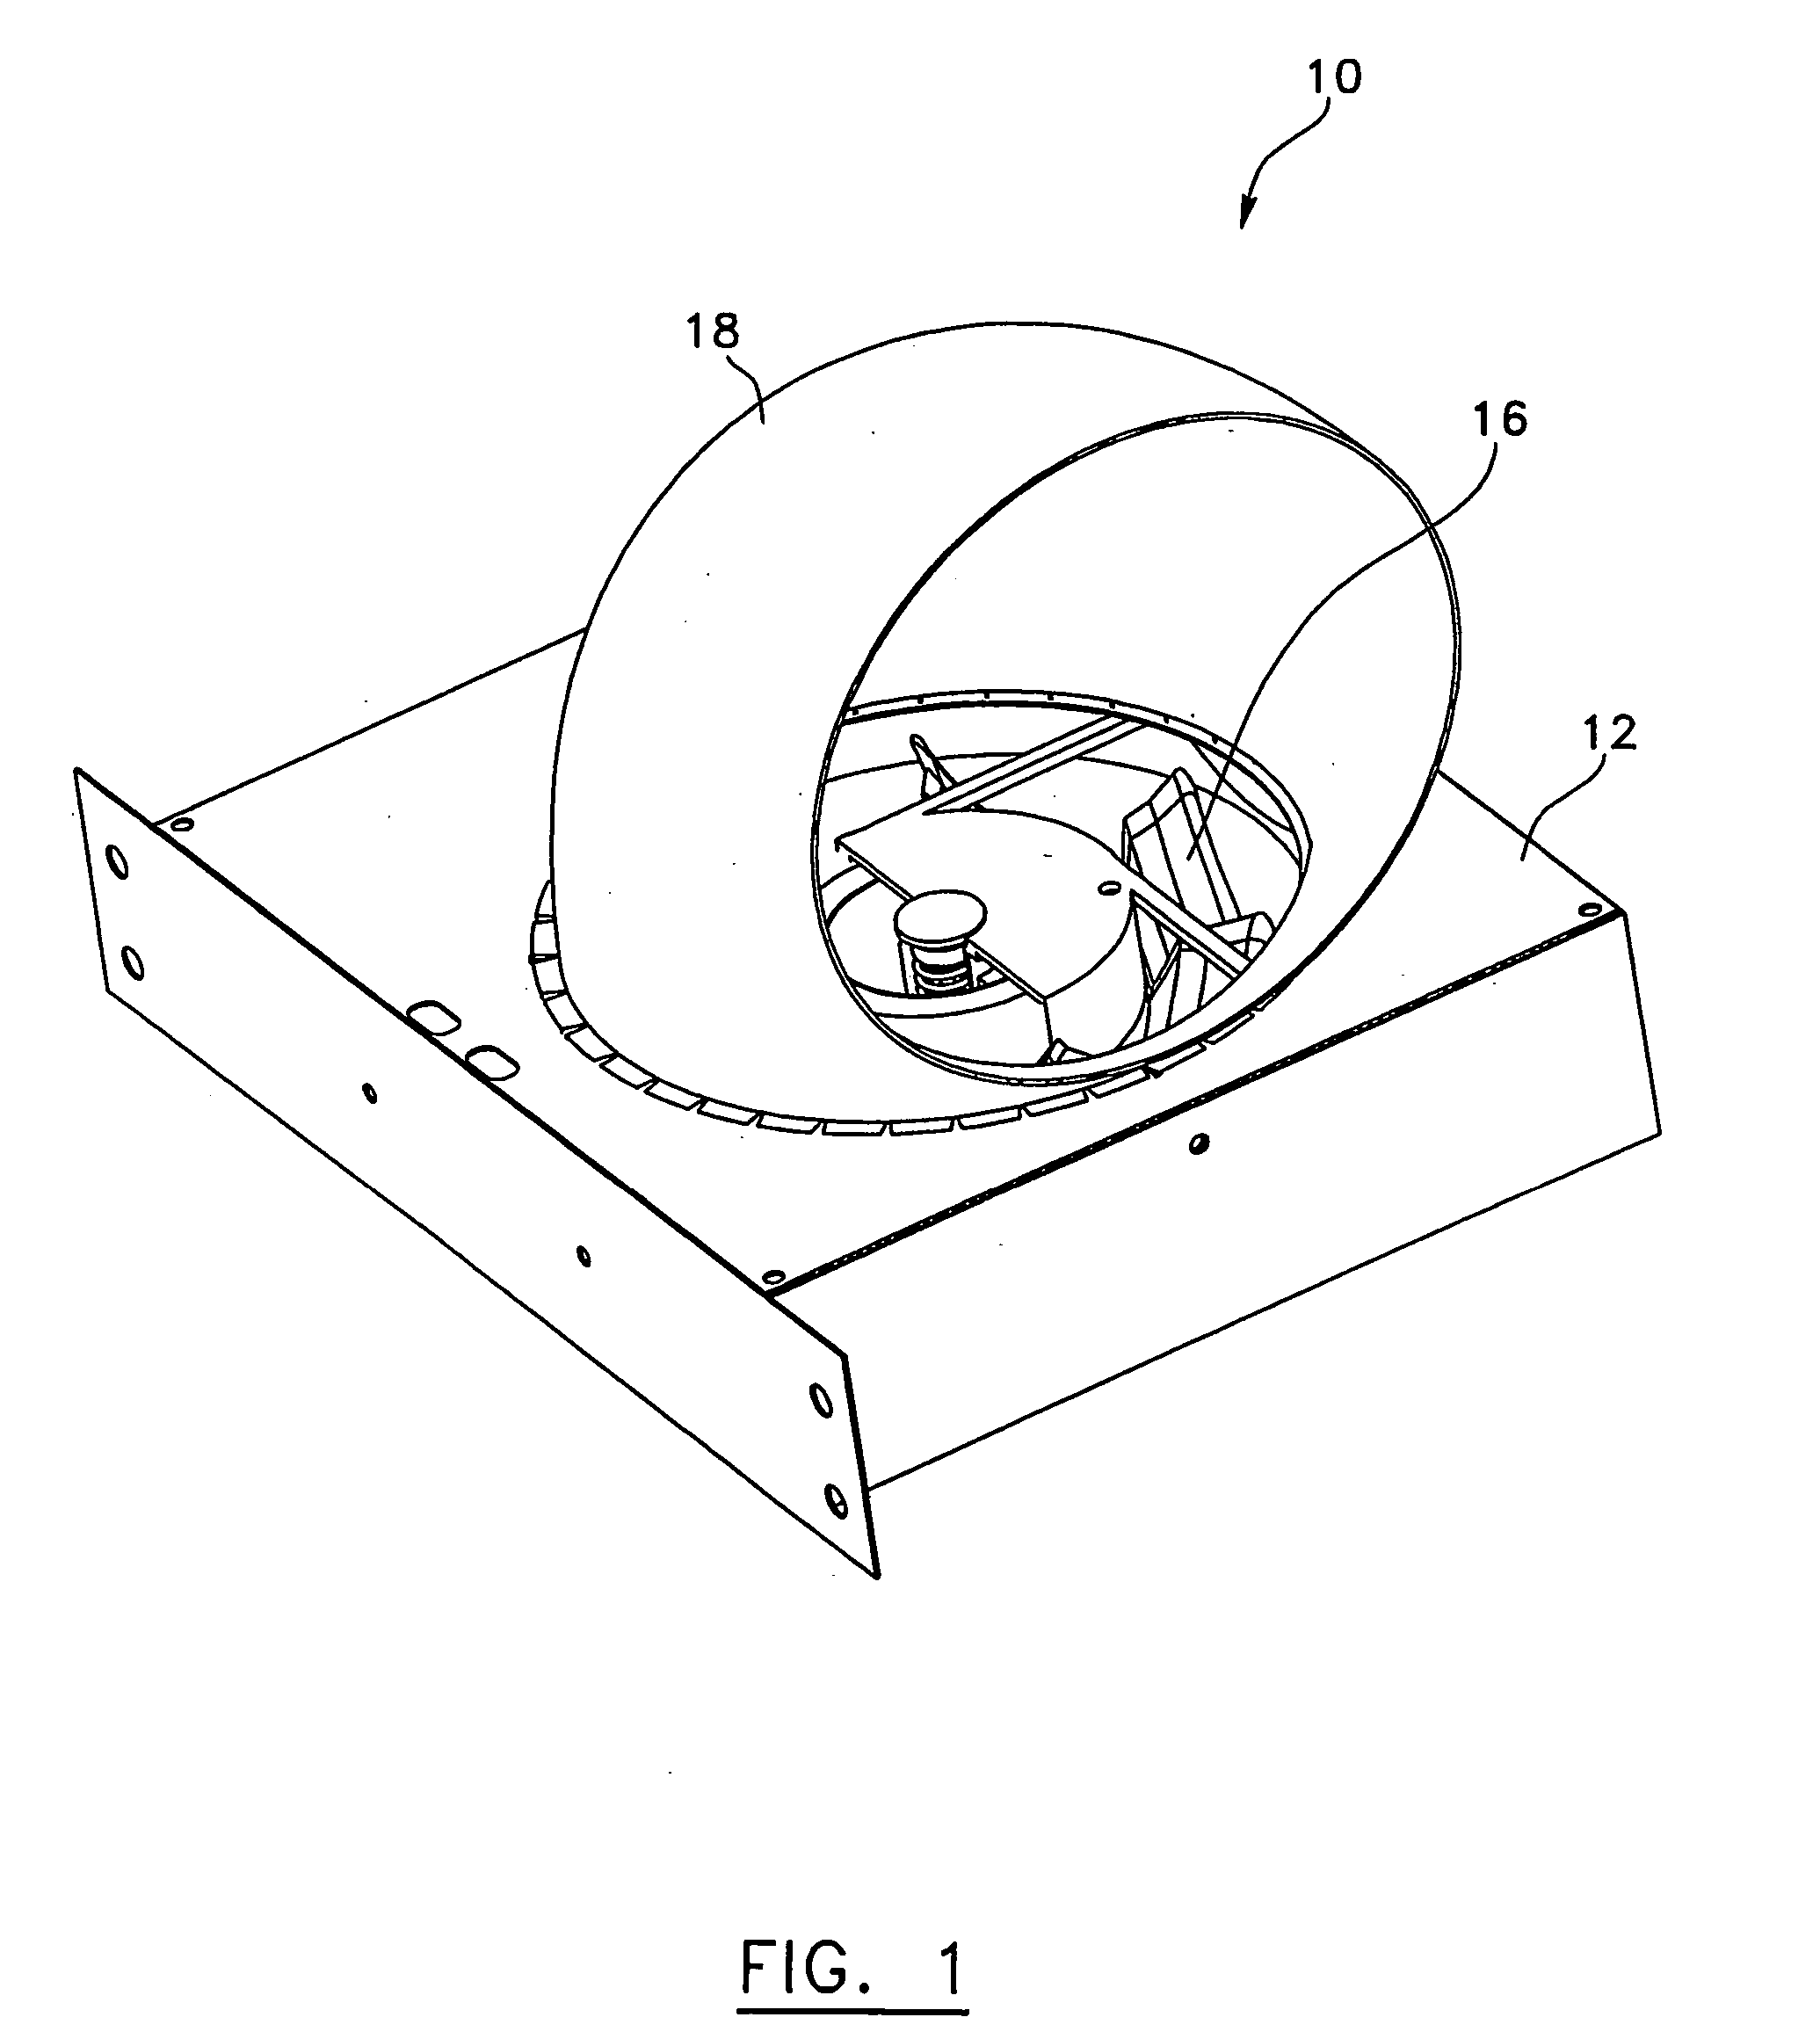 Ventilation system with axial fan and integrated accelerator/deflector